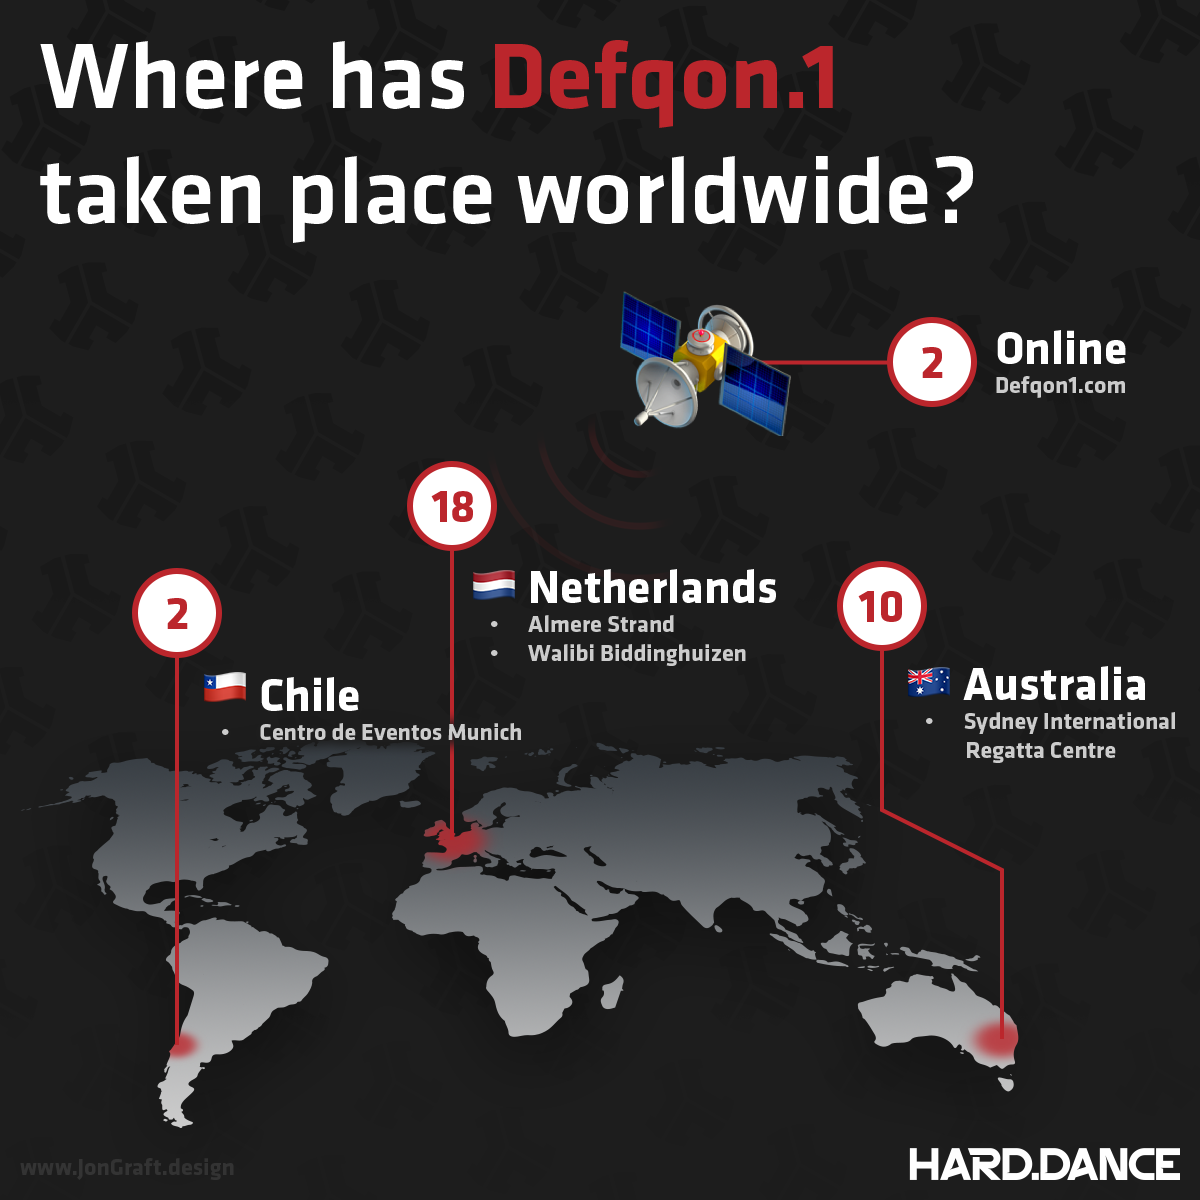 Where has Defqon.1 taken place worldwide infographic.